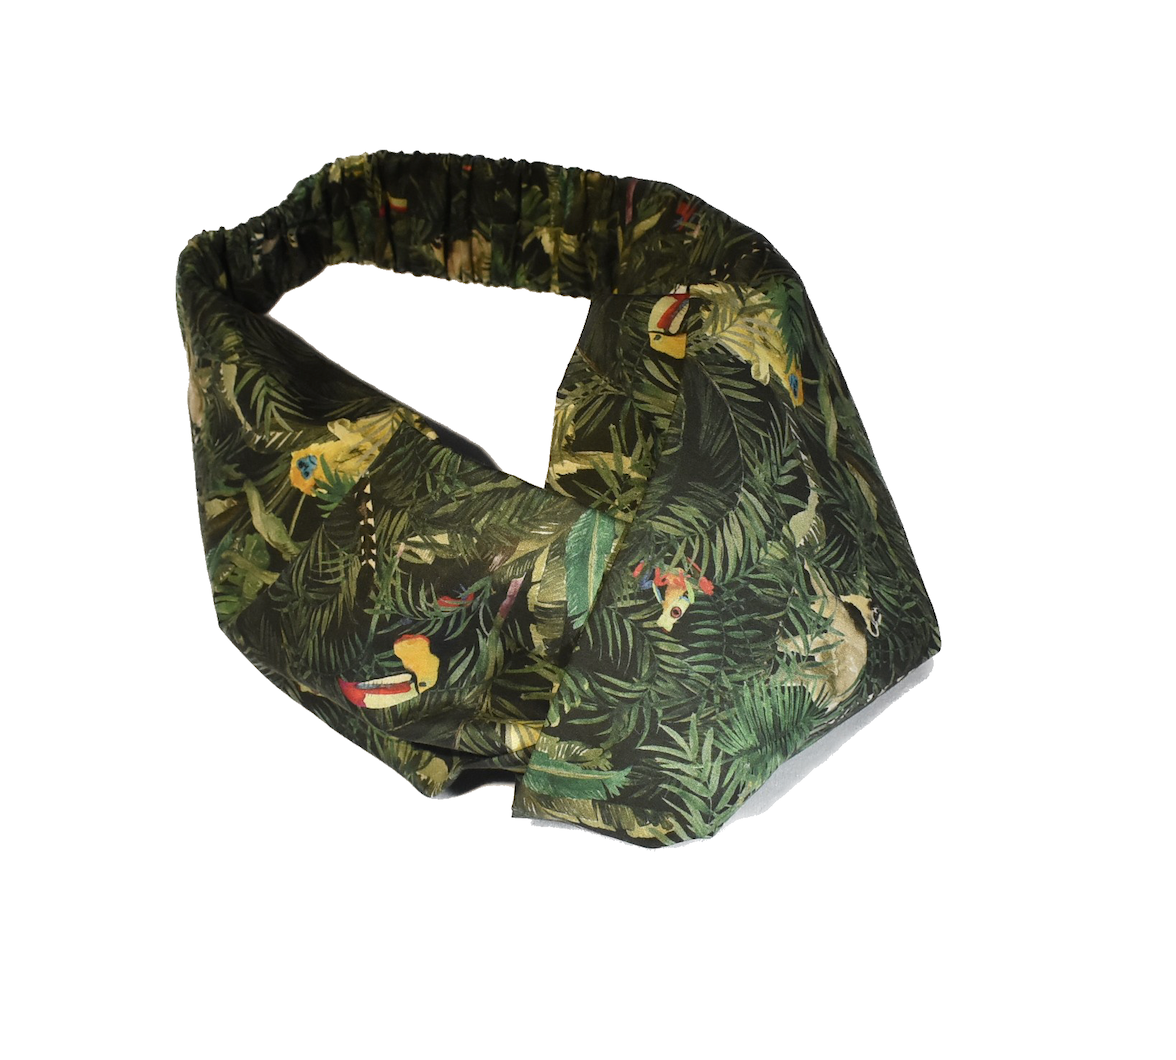 Kids Tot Knot Twisted hairband - Liberty of London Tou-Can Hide Jungle Animal print